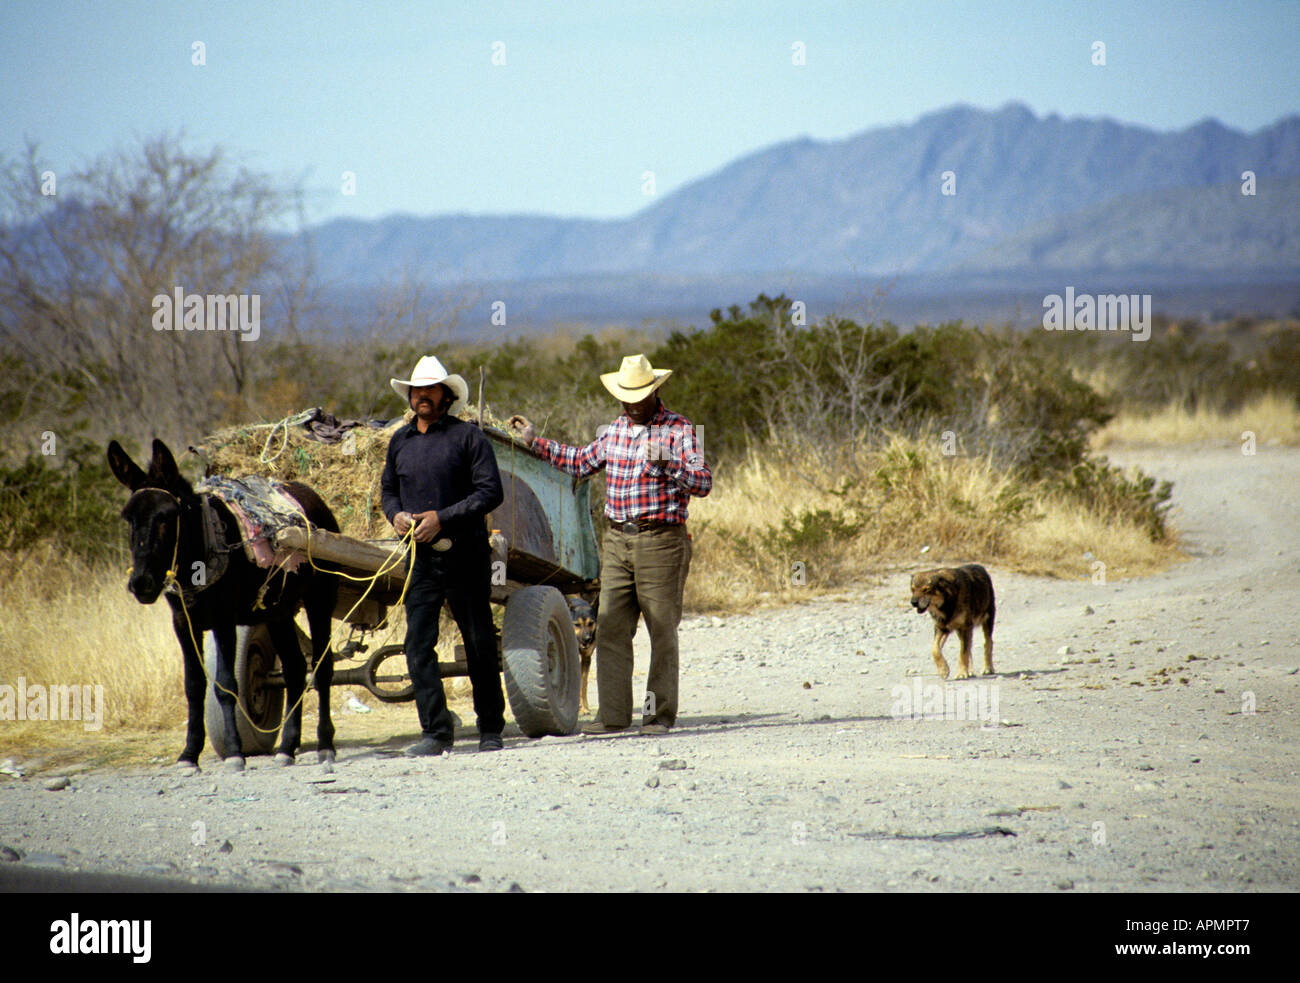 Two men walk beside a donkey and cart followed by a dog along a stony route on the Alto Plano near Hidalgo del Parral Stock Photo